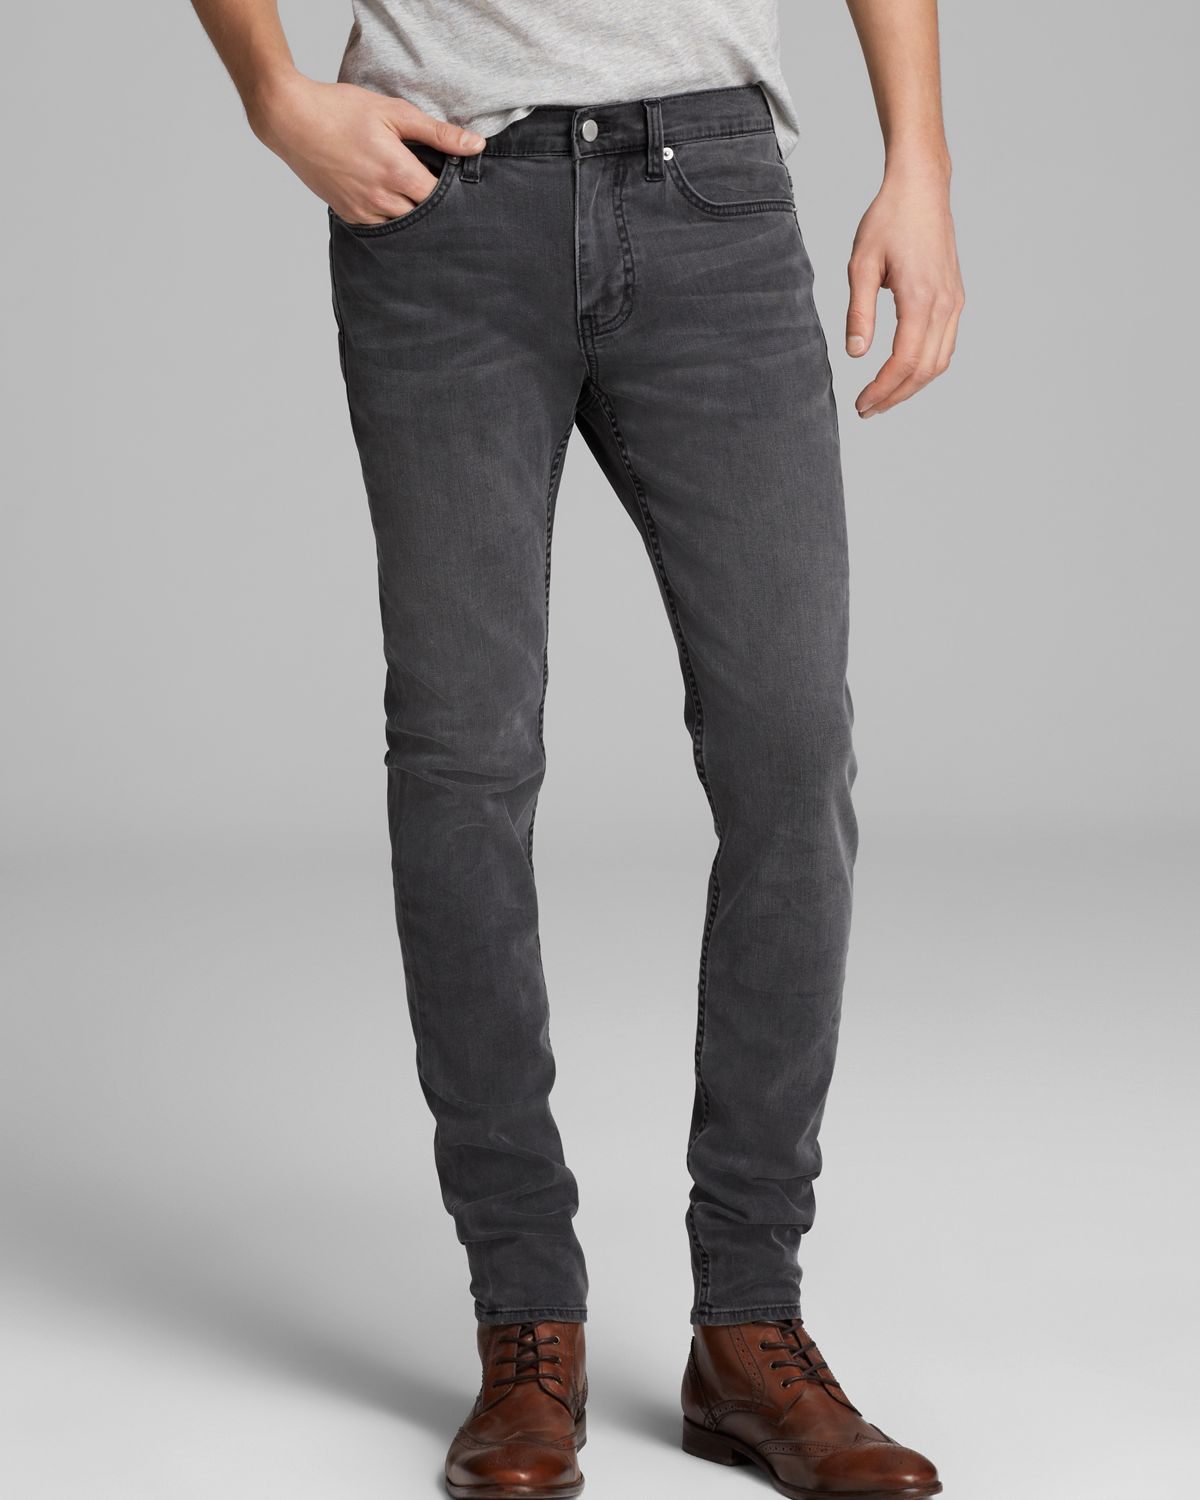 BLK DNM Jeans Slim Fit in Classic Wash Grey in Gray for Men - Lyst